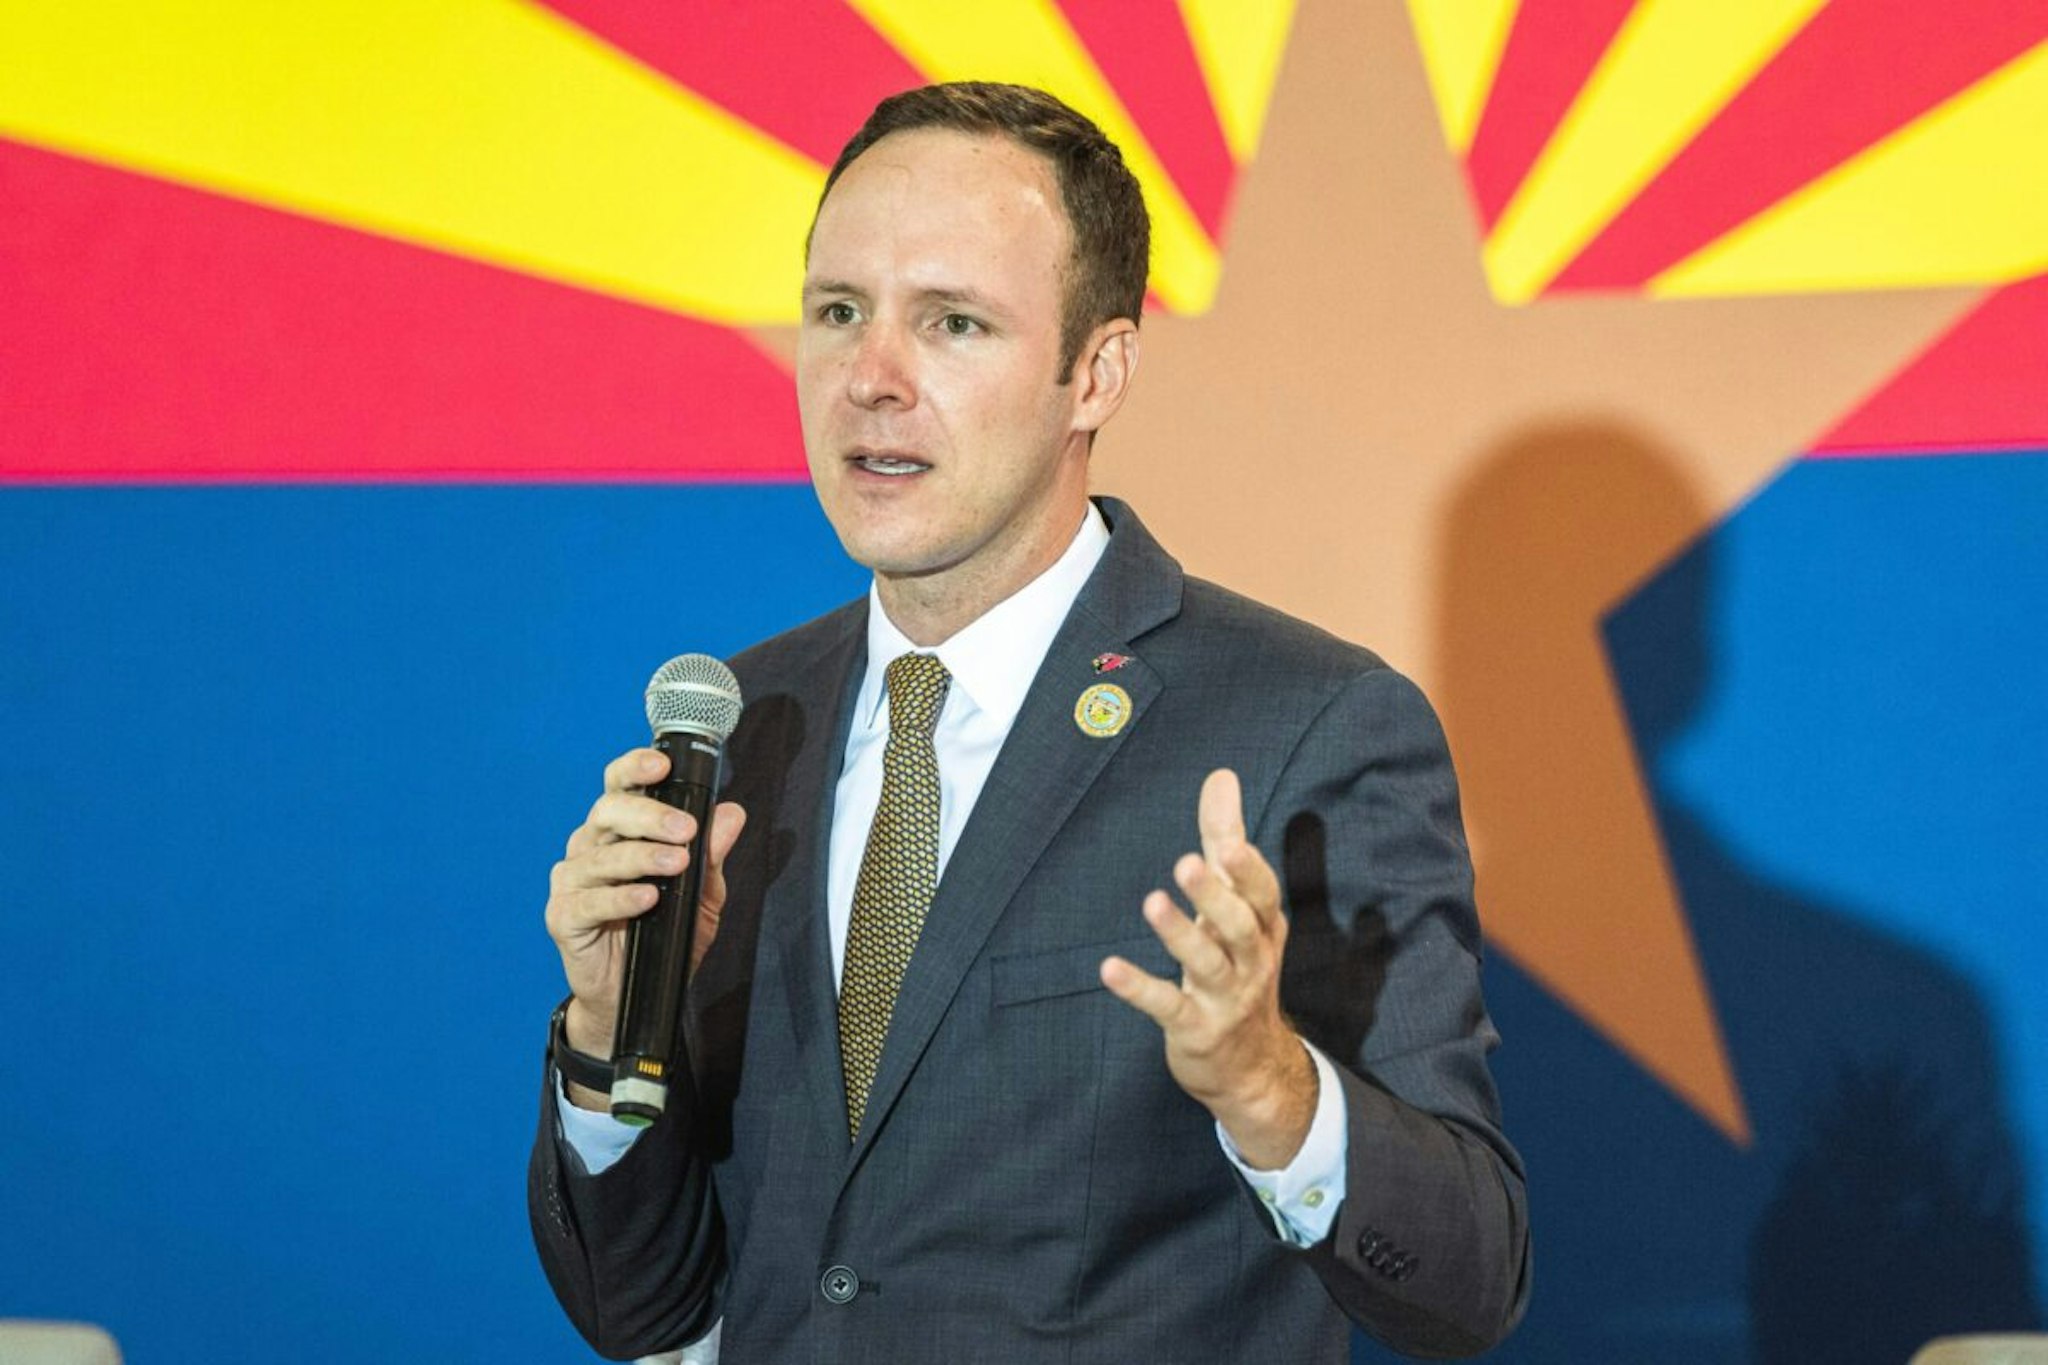 Republican Candidate for Arizona State Representative, Matt Gress, speaks to the audience at the Ask Me Anything Tour by Gubernatorial candidate Kari Lake, in Scottsdale, Arizona, on October 25, 2022.